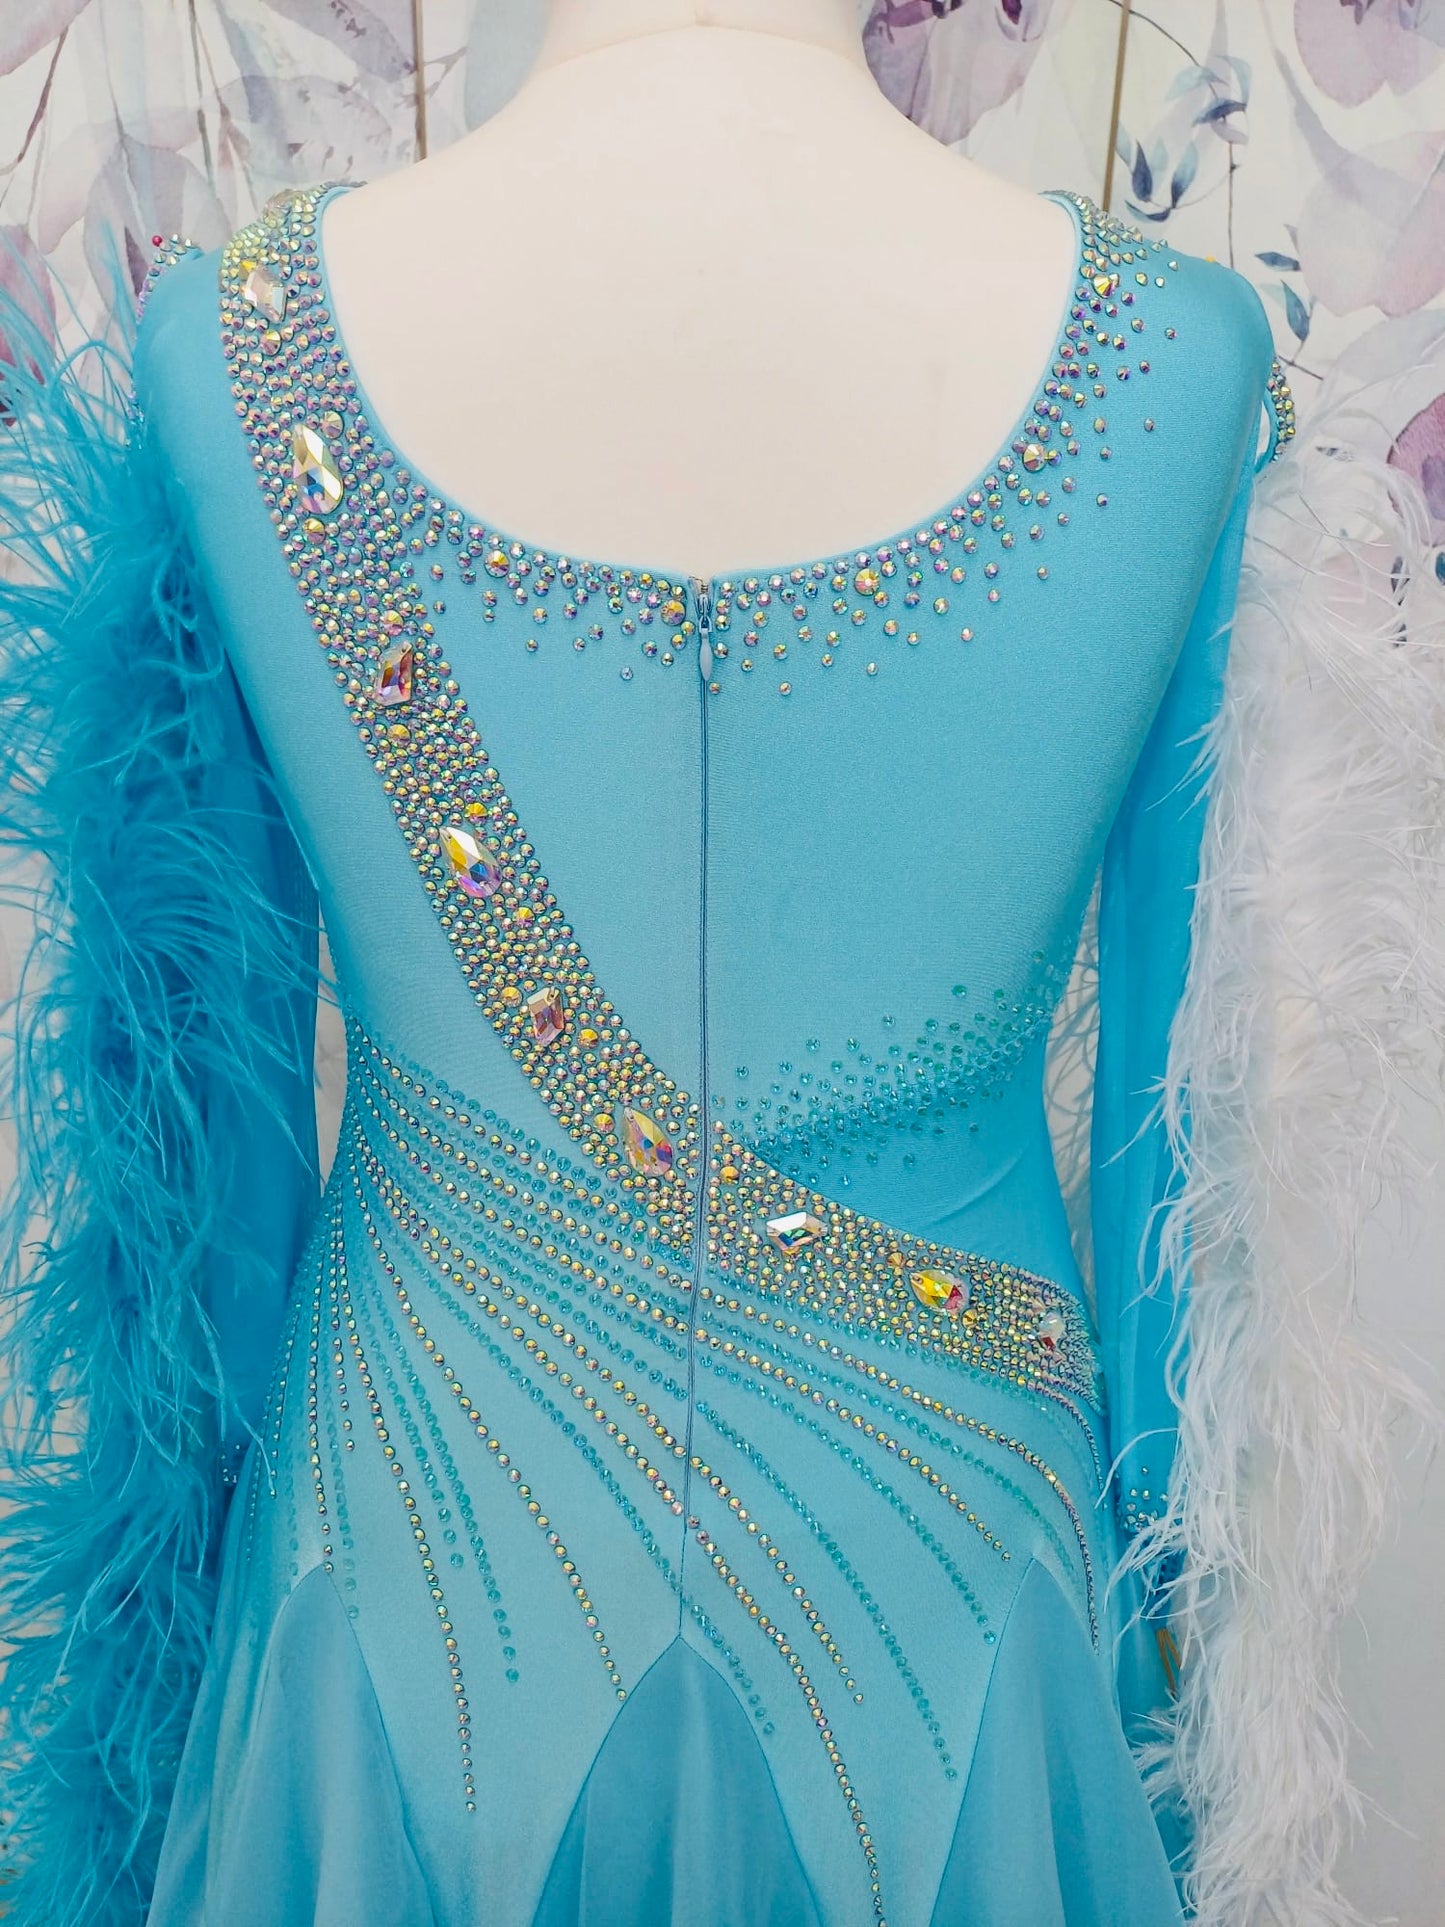 277 Beautiful Ice Blue Competition Ballroom Dance Dress. Stones in AB. Comes with Ostrich feather boa floats. These can be blue & white or a mix of the 2 colours. High back to all for wearing own bra.